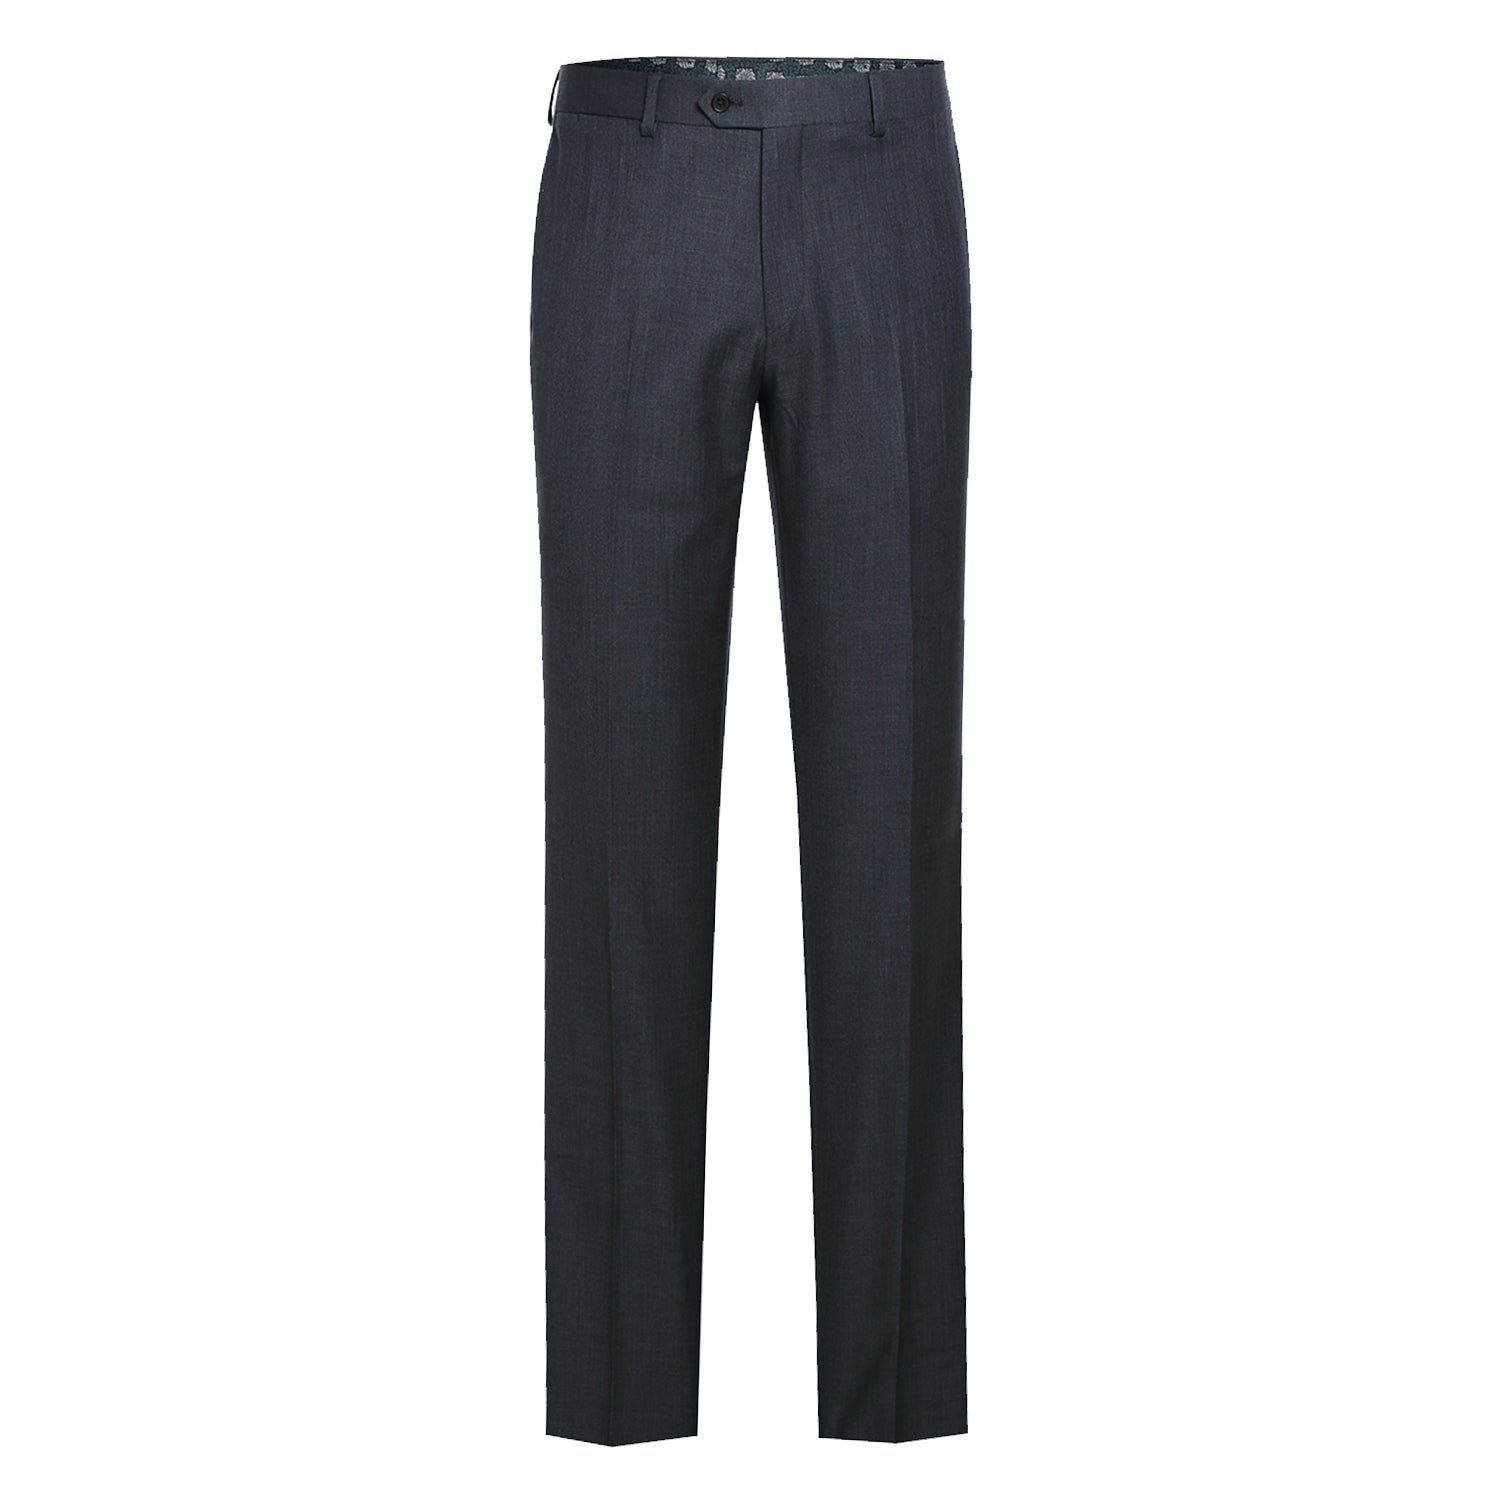 English Laundry Solid Charcoal Notch Suit 8